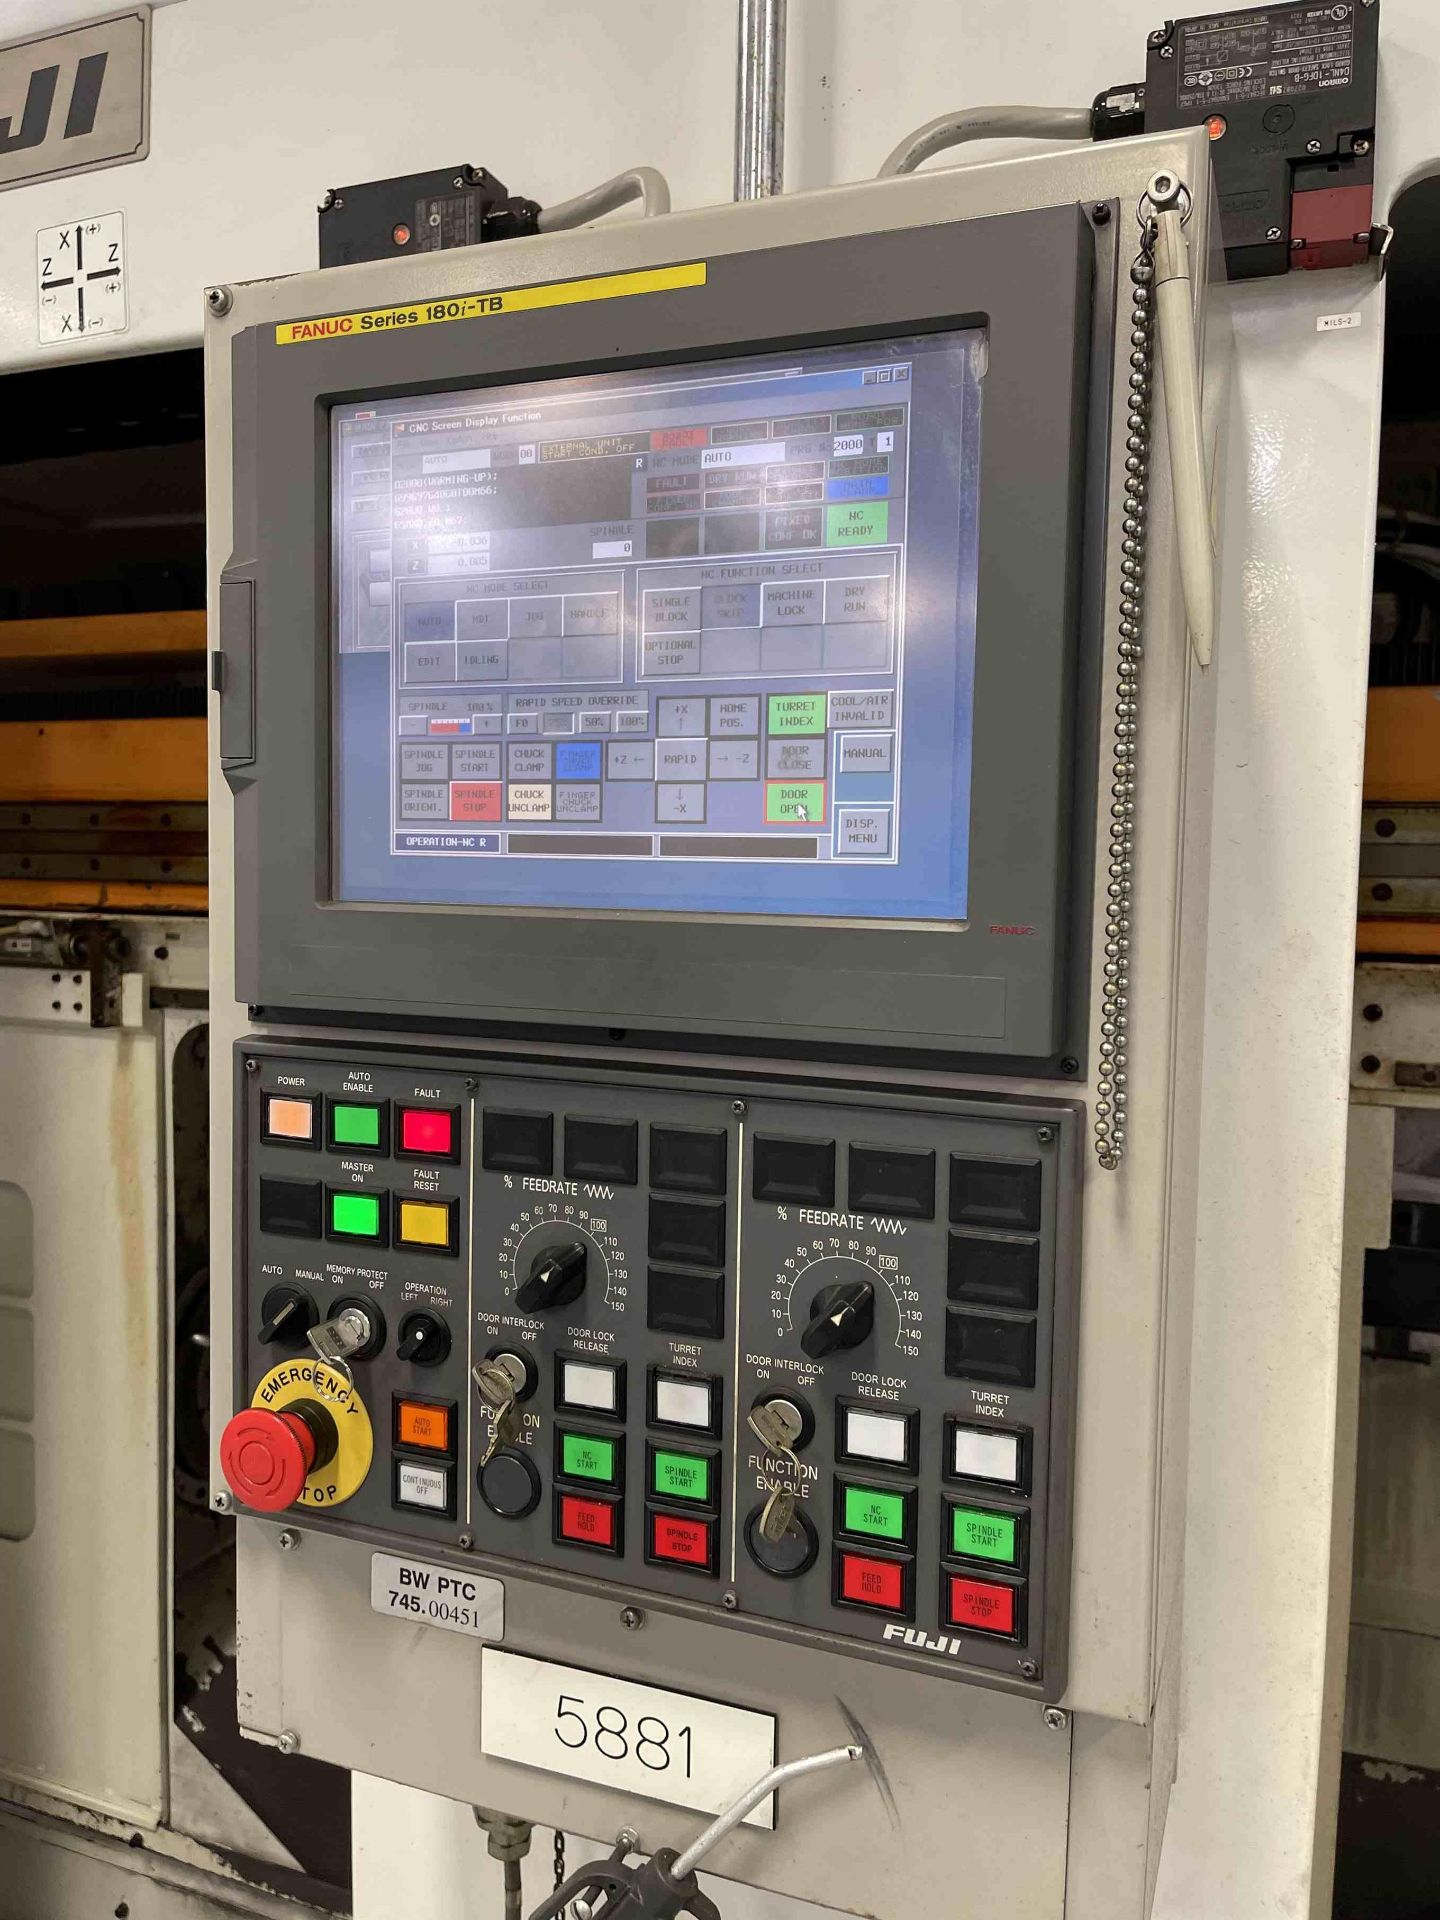 2010 FUJI ANW-30T2 Twin Spindle Lathe, s/n SE0076530, Fanuc 180i-TB Control, Dual 8-Position - Image 14 of 18